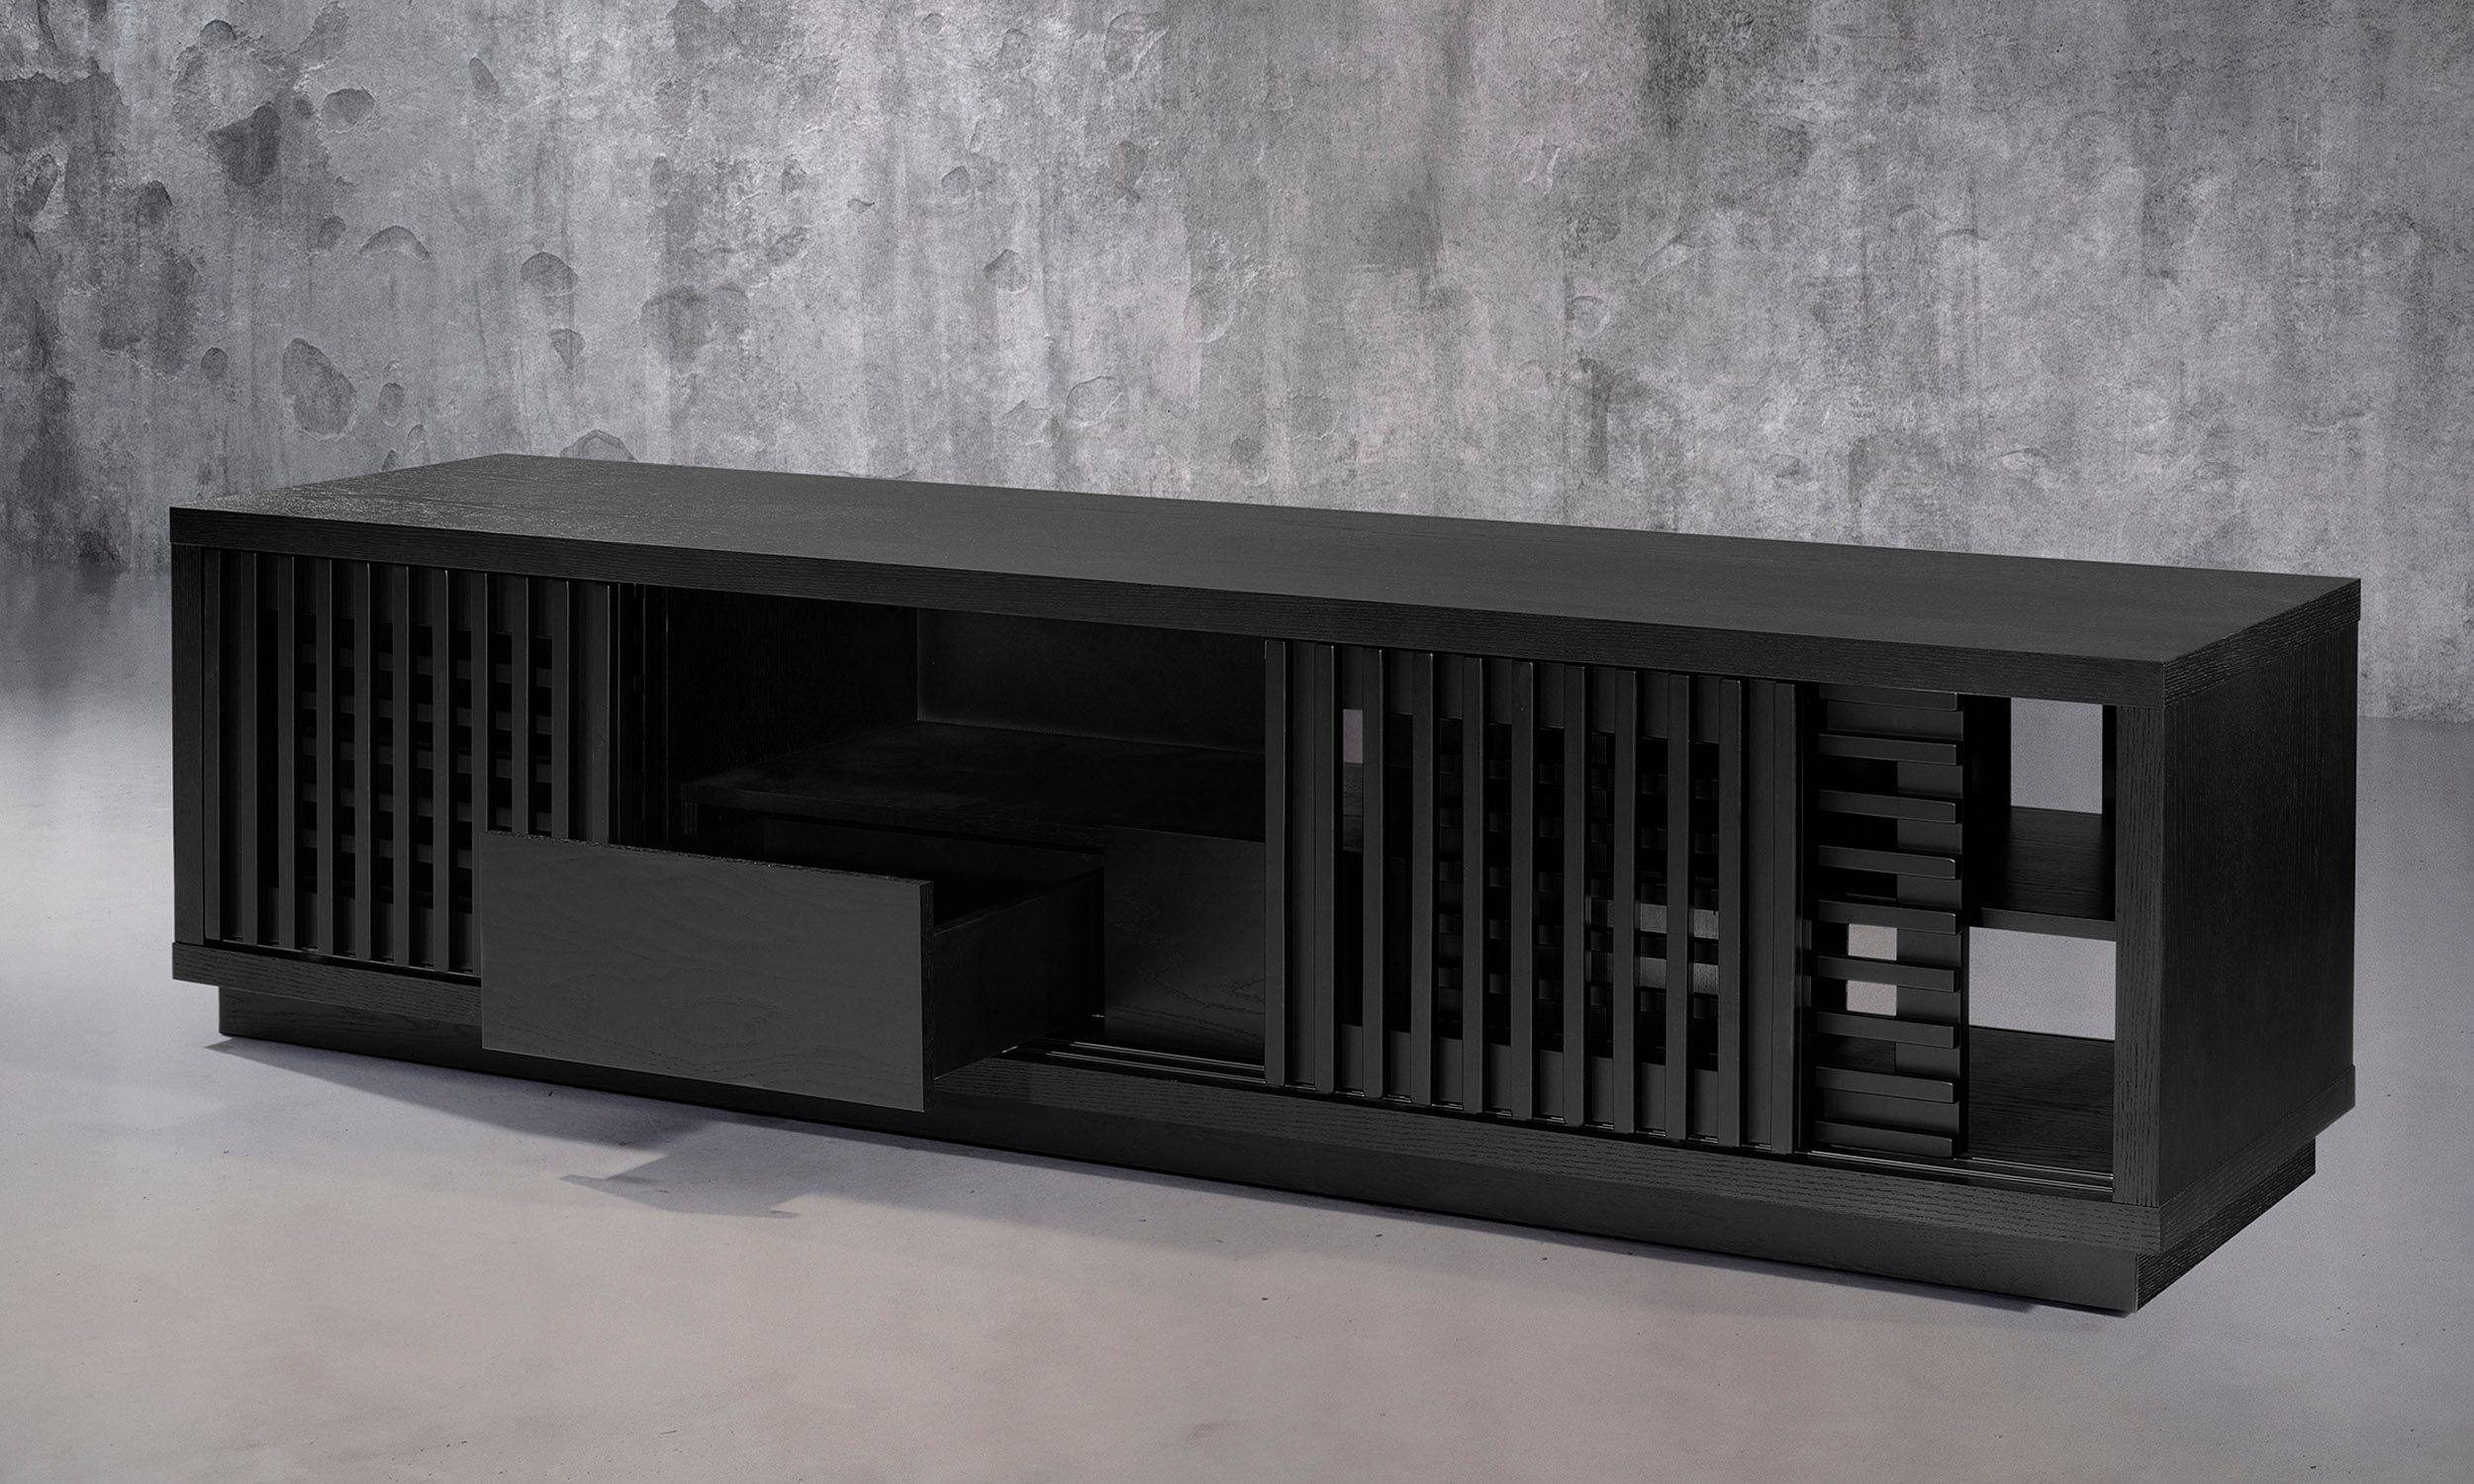 Furnitech FT82WSEB Contemporary TV Stand Media Console up ...